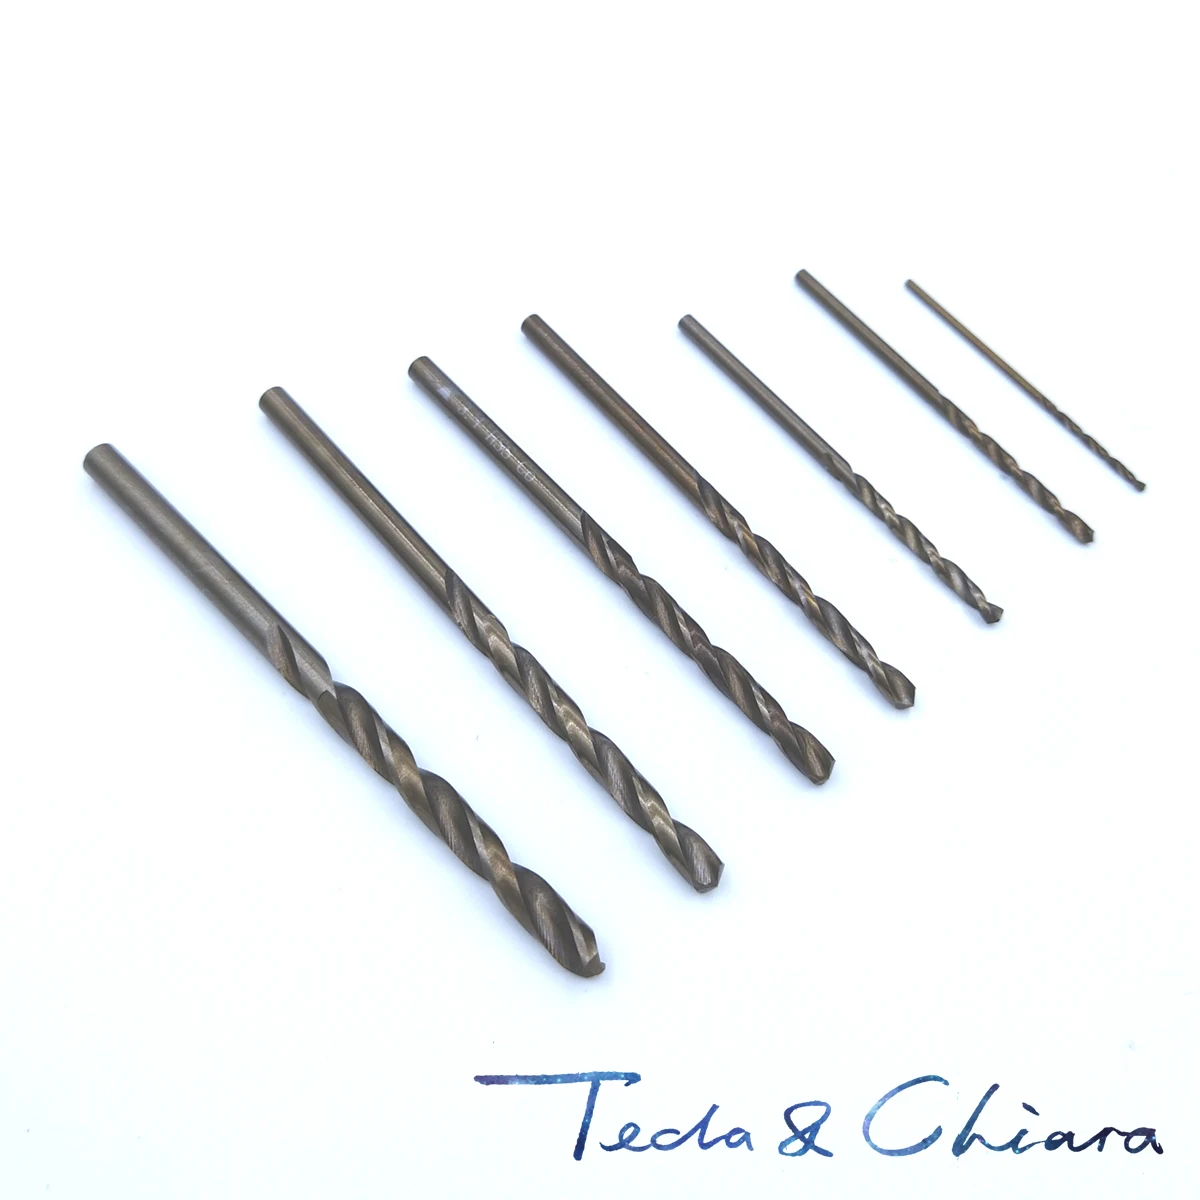 0.8 0.9 1 1.1 1.2 1.3 1.4 1.5 1.6 1.7 1.8 1.9 mm HSS-CO M35 Cobalt Steel Straight Shank Twist Drill Bits For Stainless Steel